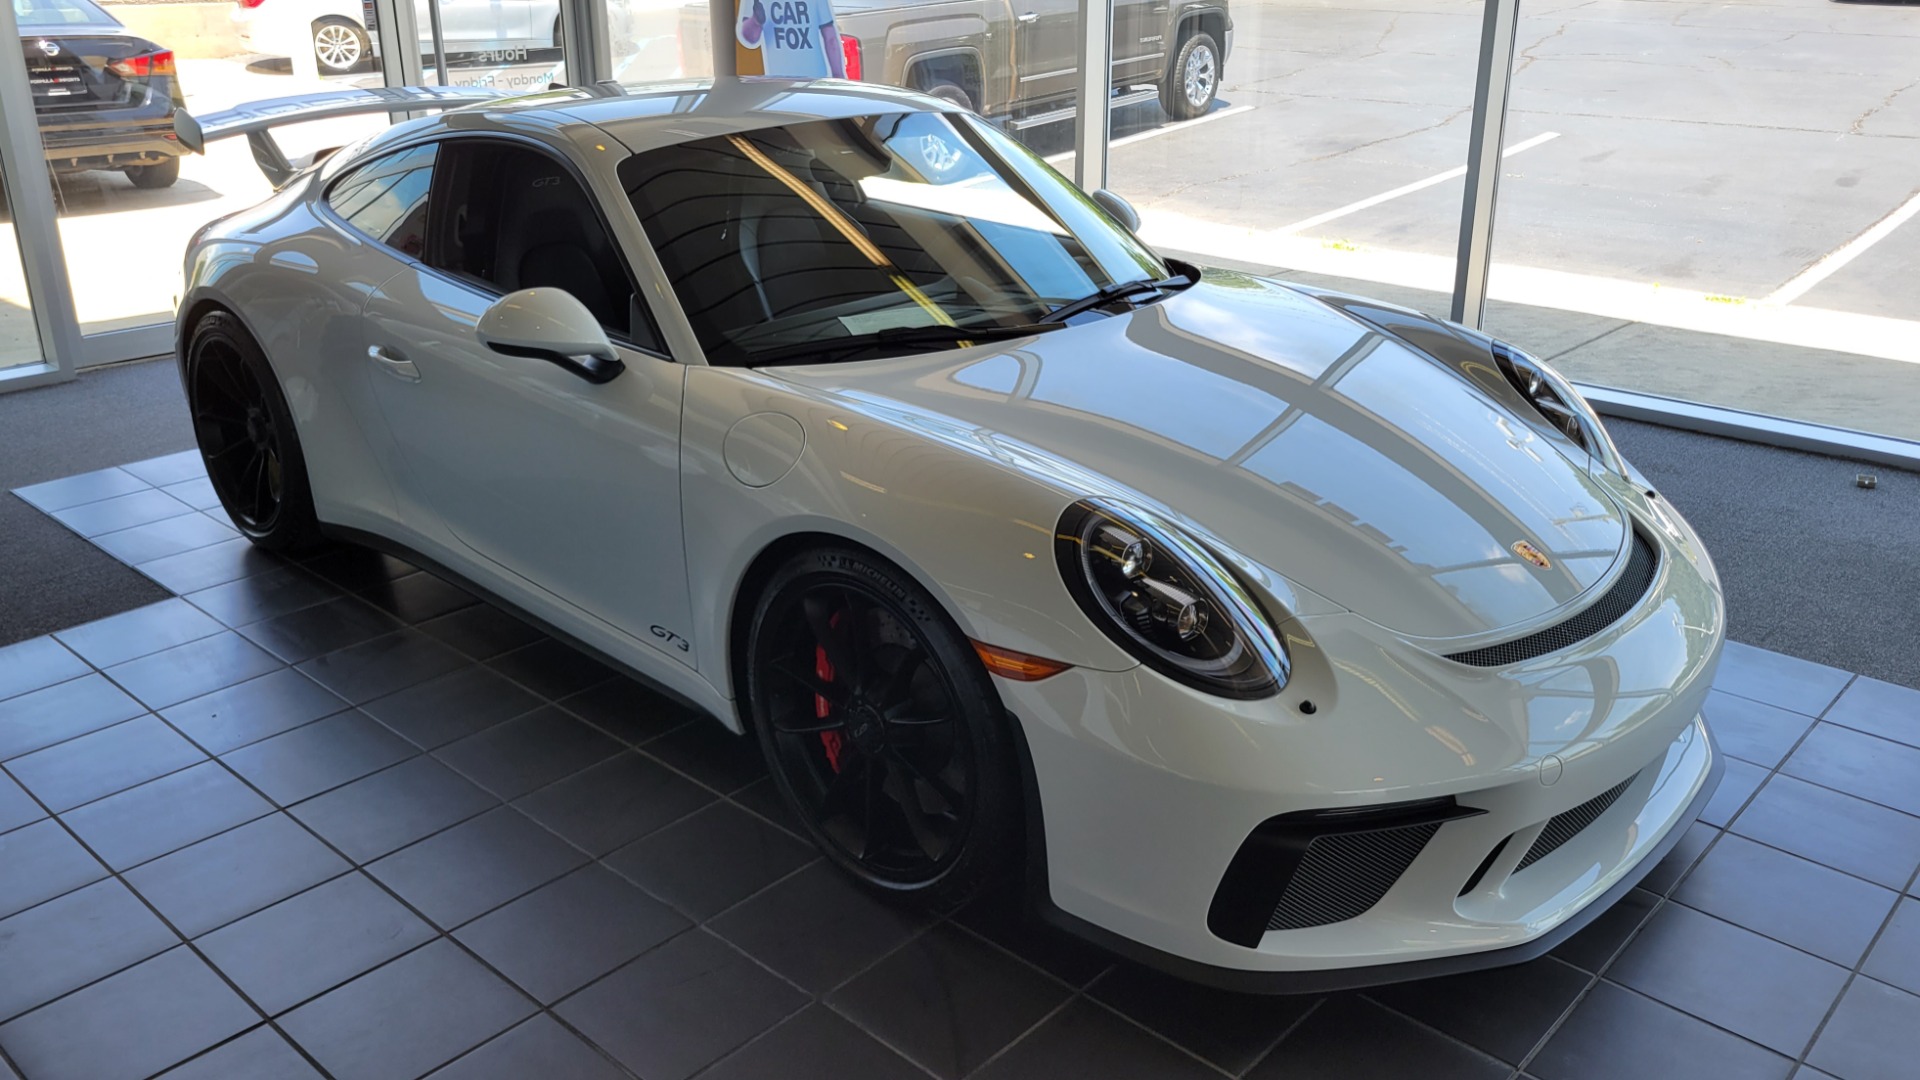 Used 2019 Porsche 911 GT3 4.0L 520HP COUPE / PDK 7-SPD / BOSE / APPLE / REARVIEW for sale $203,995 at Formula Imports in Charlotte NC 28227 4